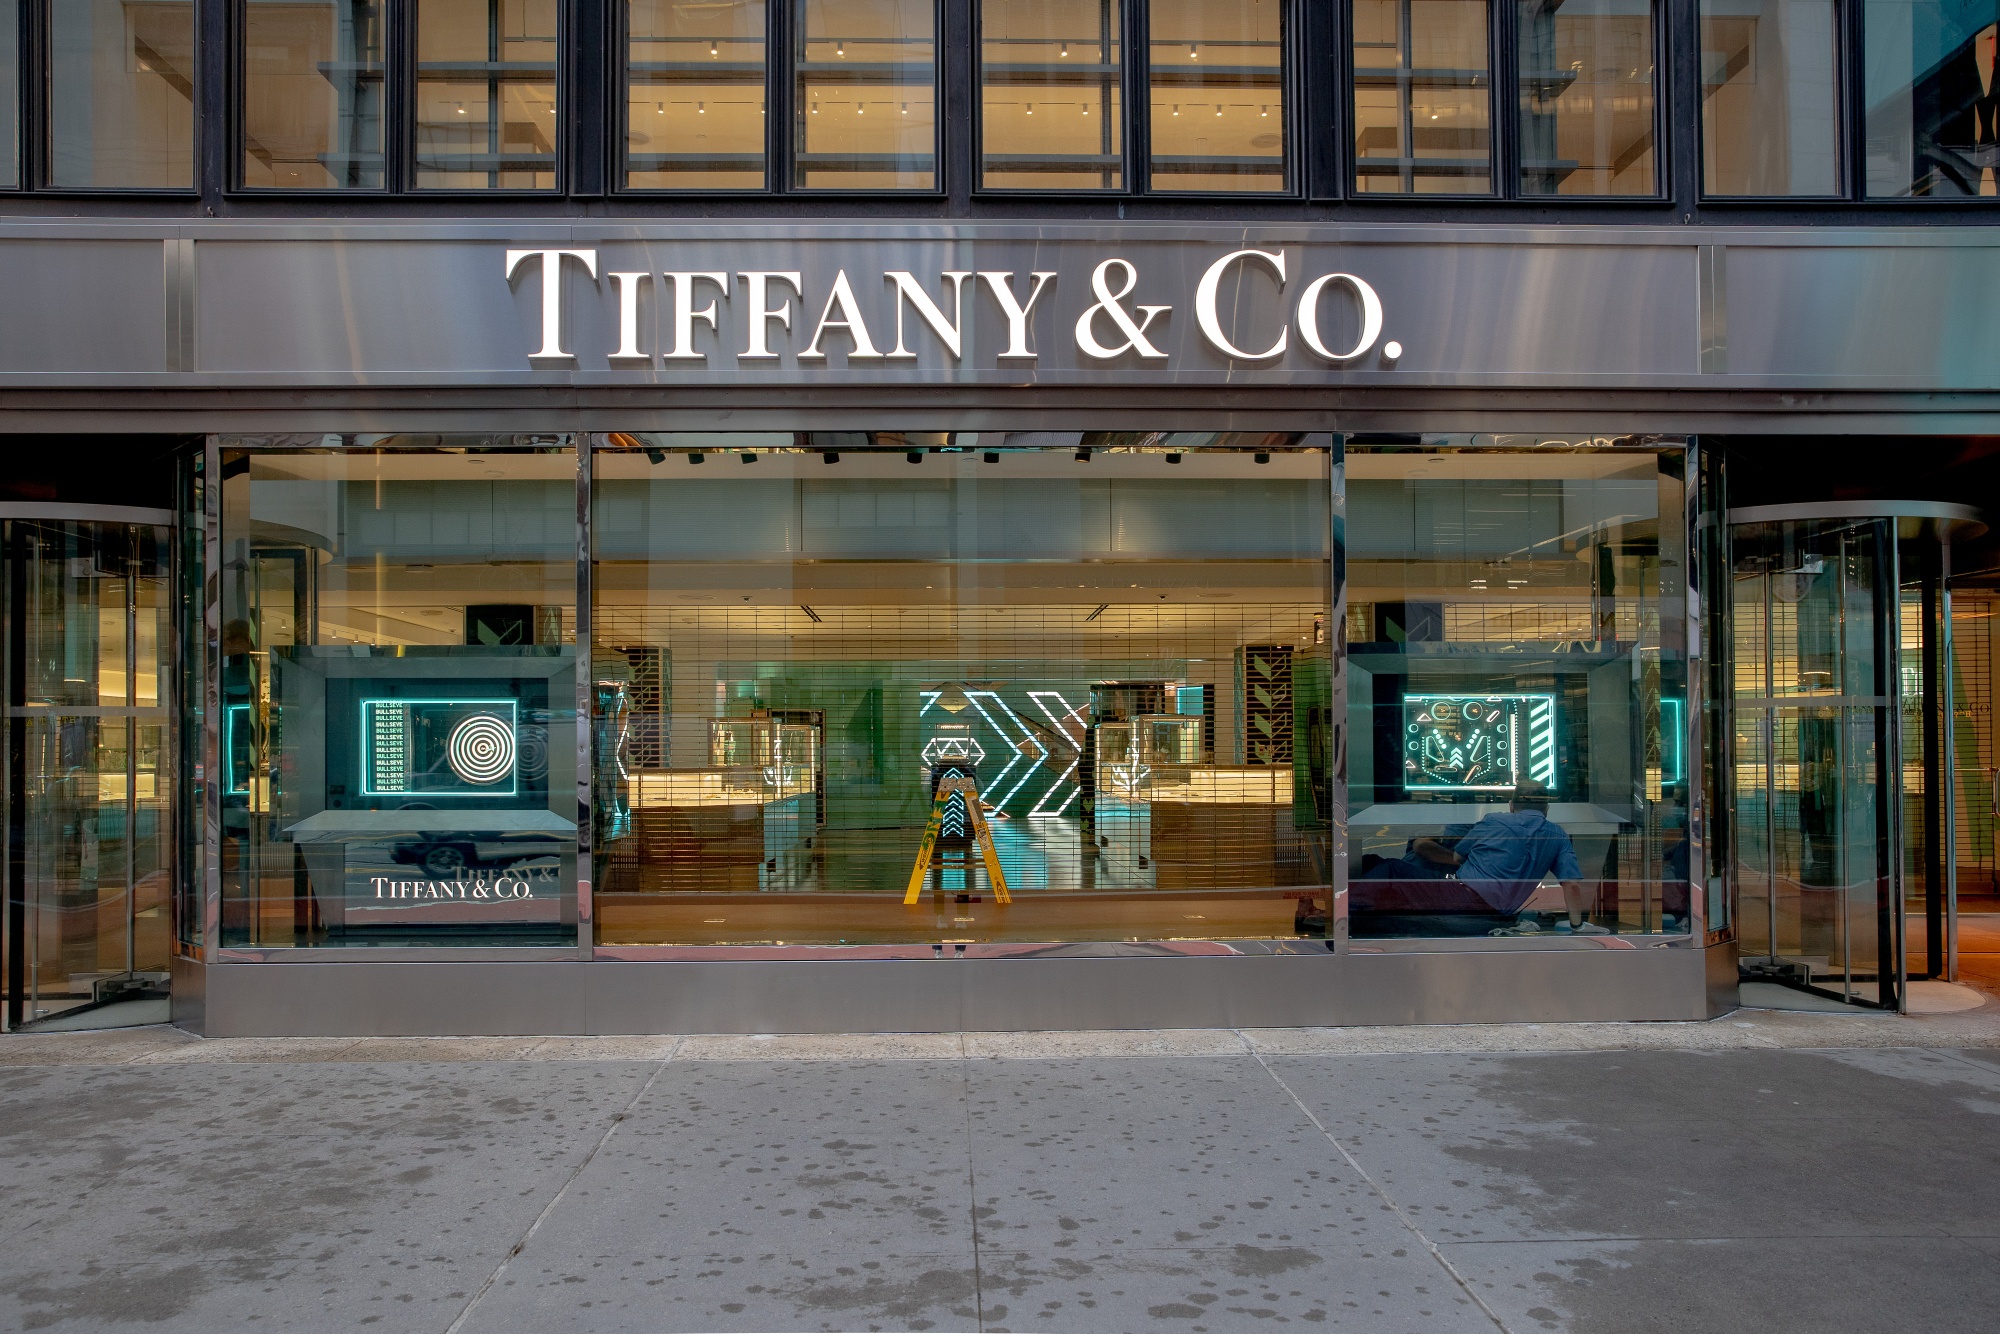 Tiffany & Co. Teams Up With CryptoPunks To Sell NFTs - Retail Bum